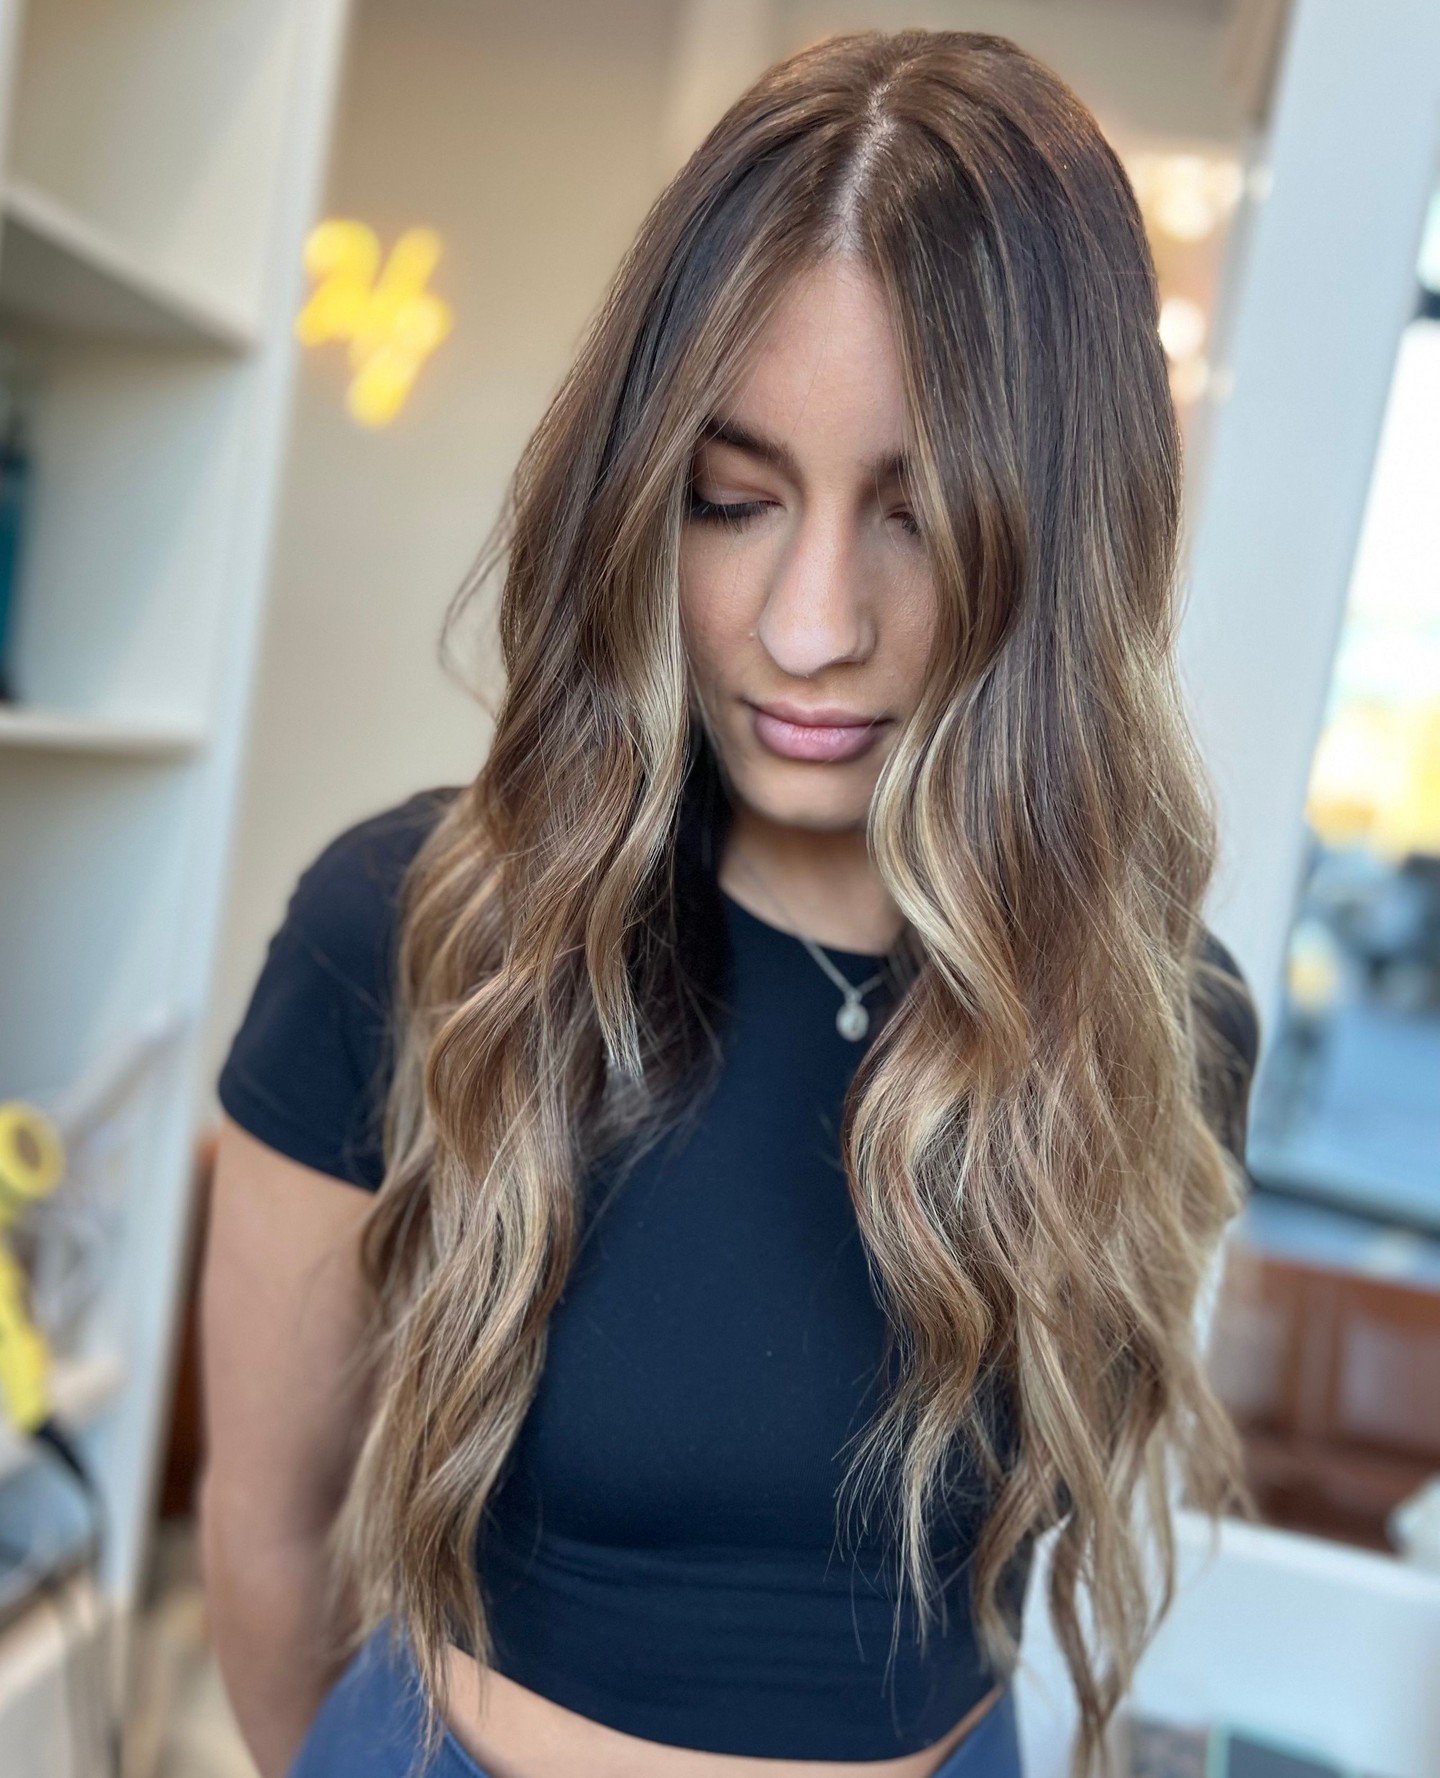 When it comes to looking your best, we're in the business of breaking necks... not just turning heads.✨💁&zwj;♀️ #LuxeLabStudio #HairInspo ⁠
⁠
Book an appointment with @styledby_ehernandez and watch how fast your DMs start popping off... you know the